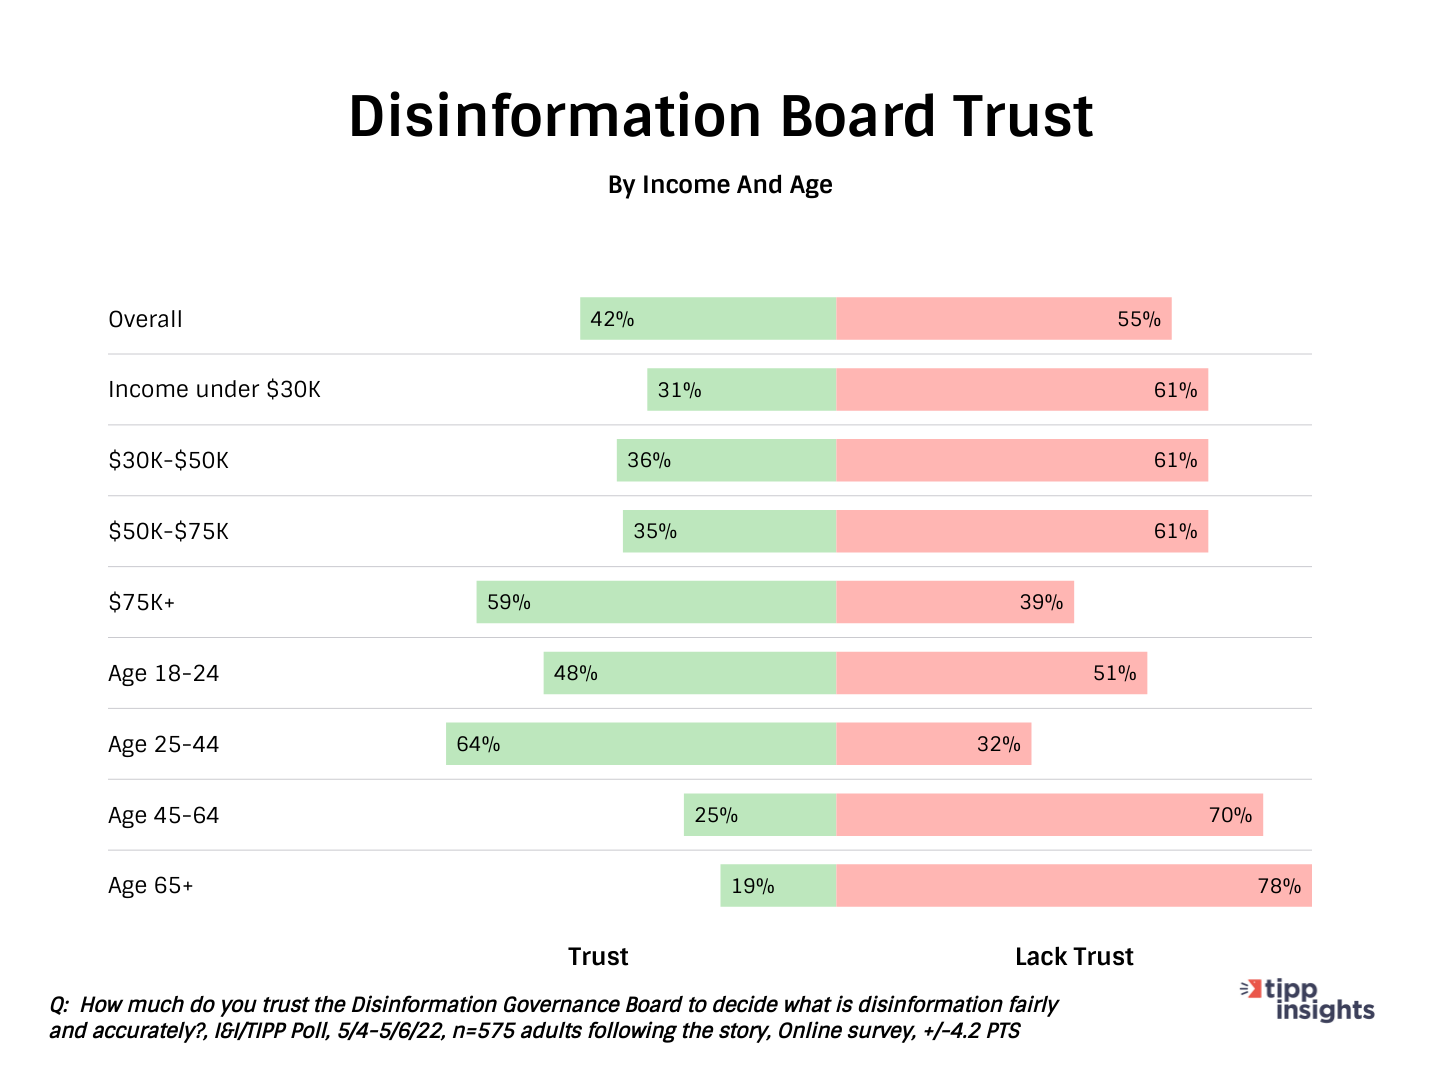 I&I/TIPP Poll Results: Americans trust in the Disinformation Board along income and age lines